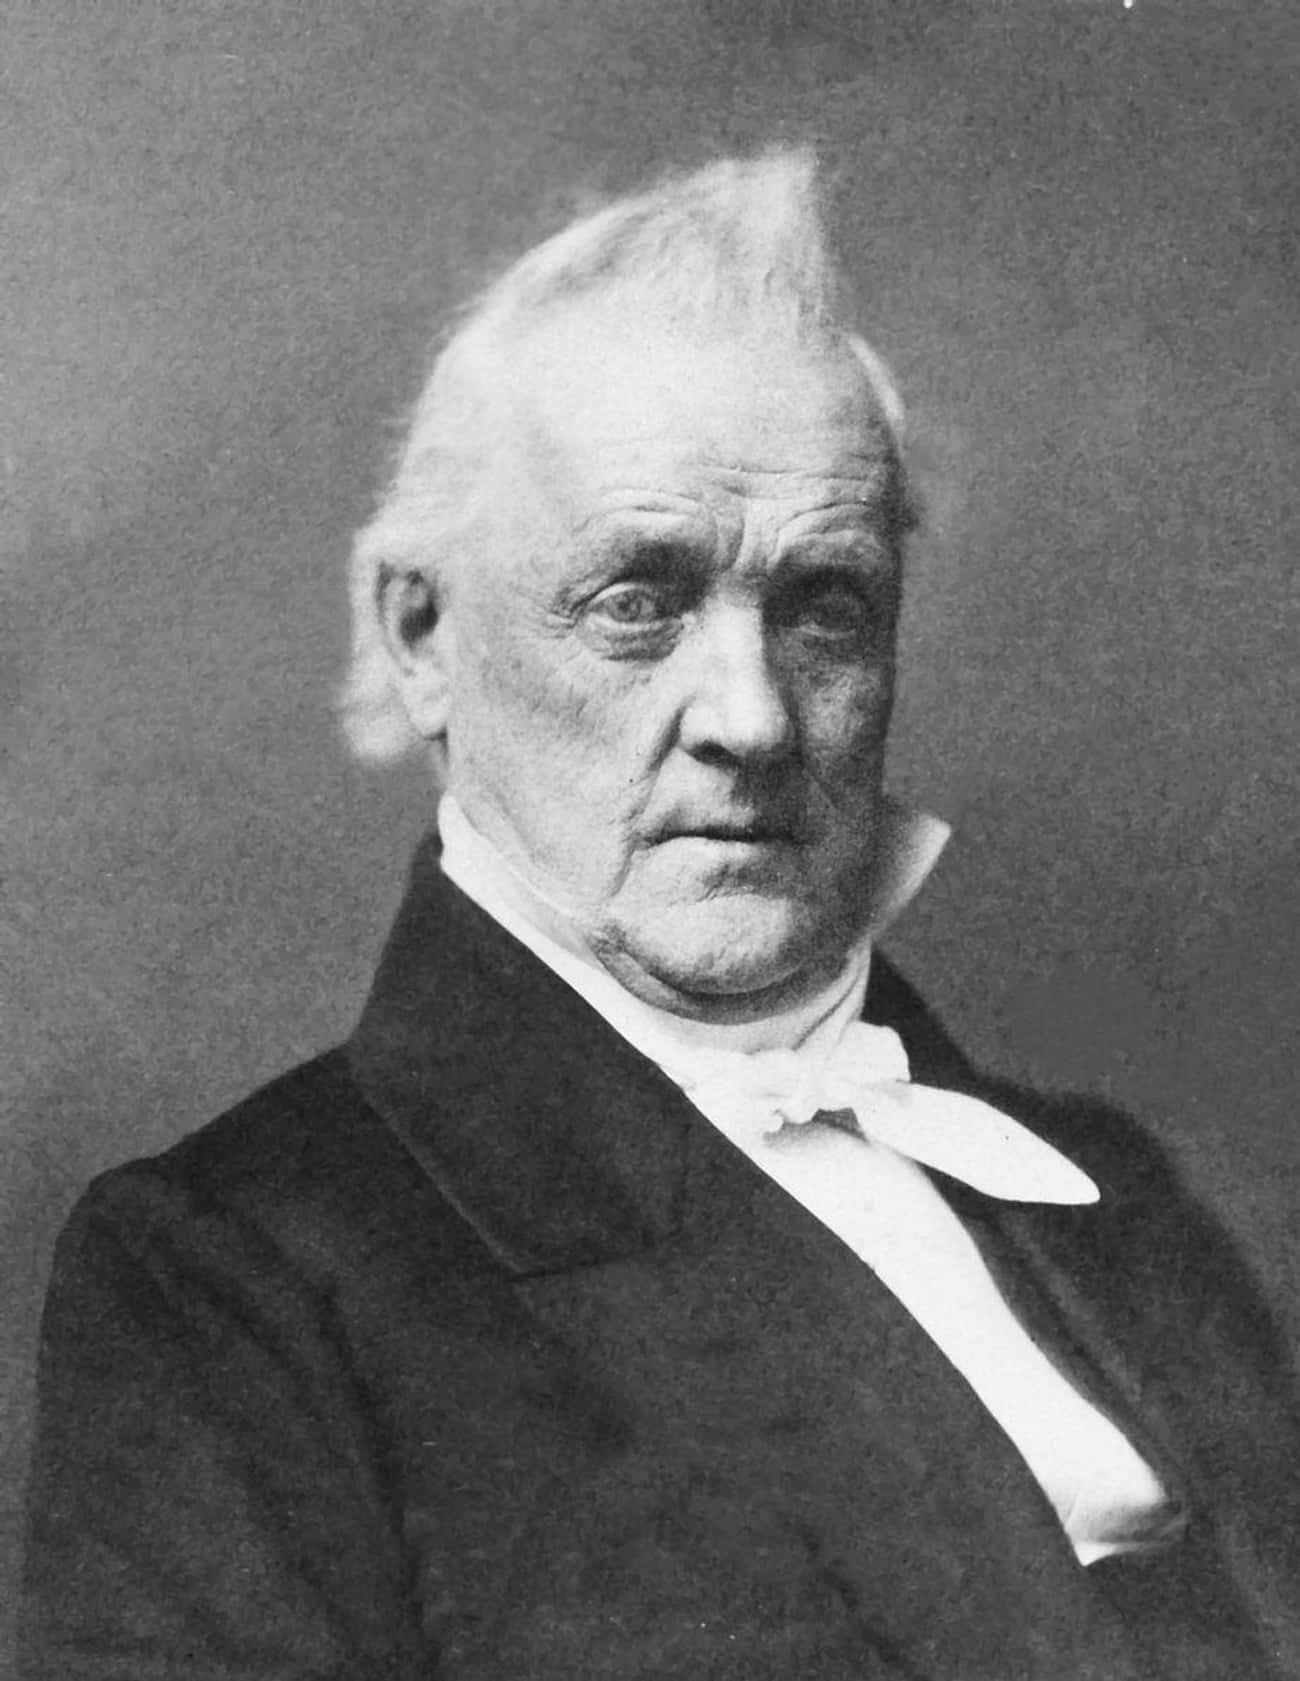 James Buchanan, Sometime After 1861 (Died Of Respiratory Failure On June 1, 1868)